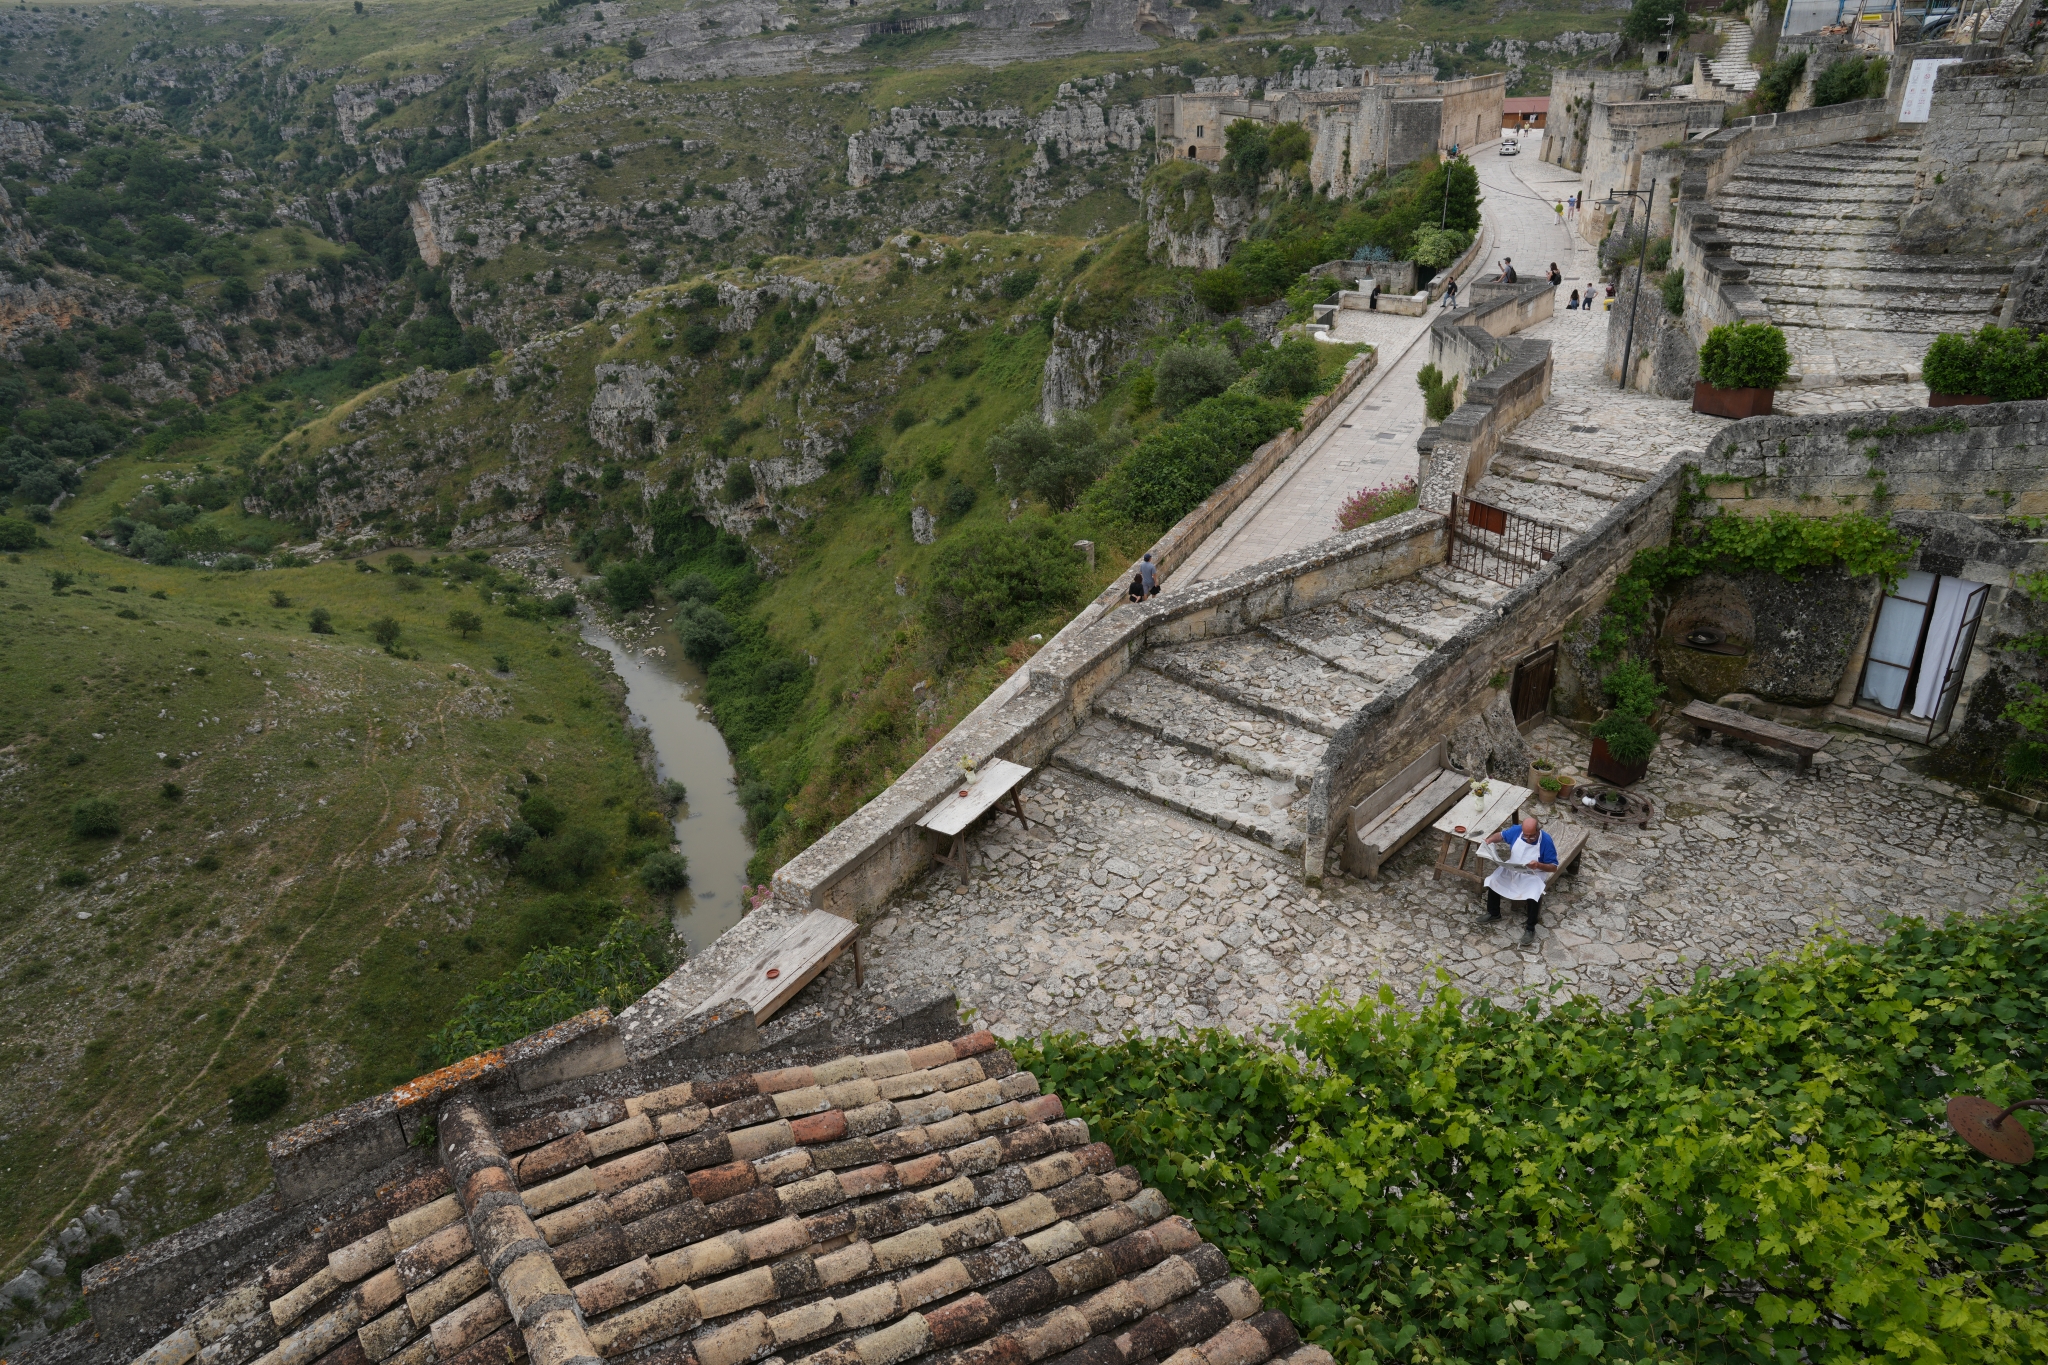 A stone-paved terrace with a view over rocky terrain